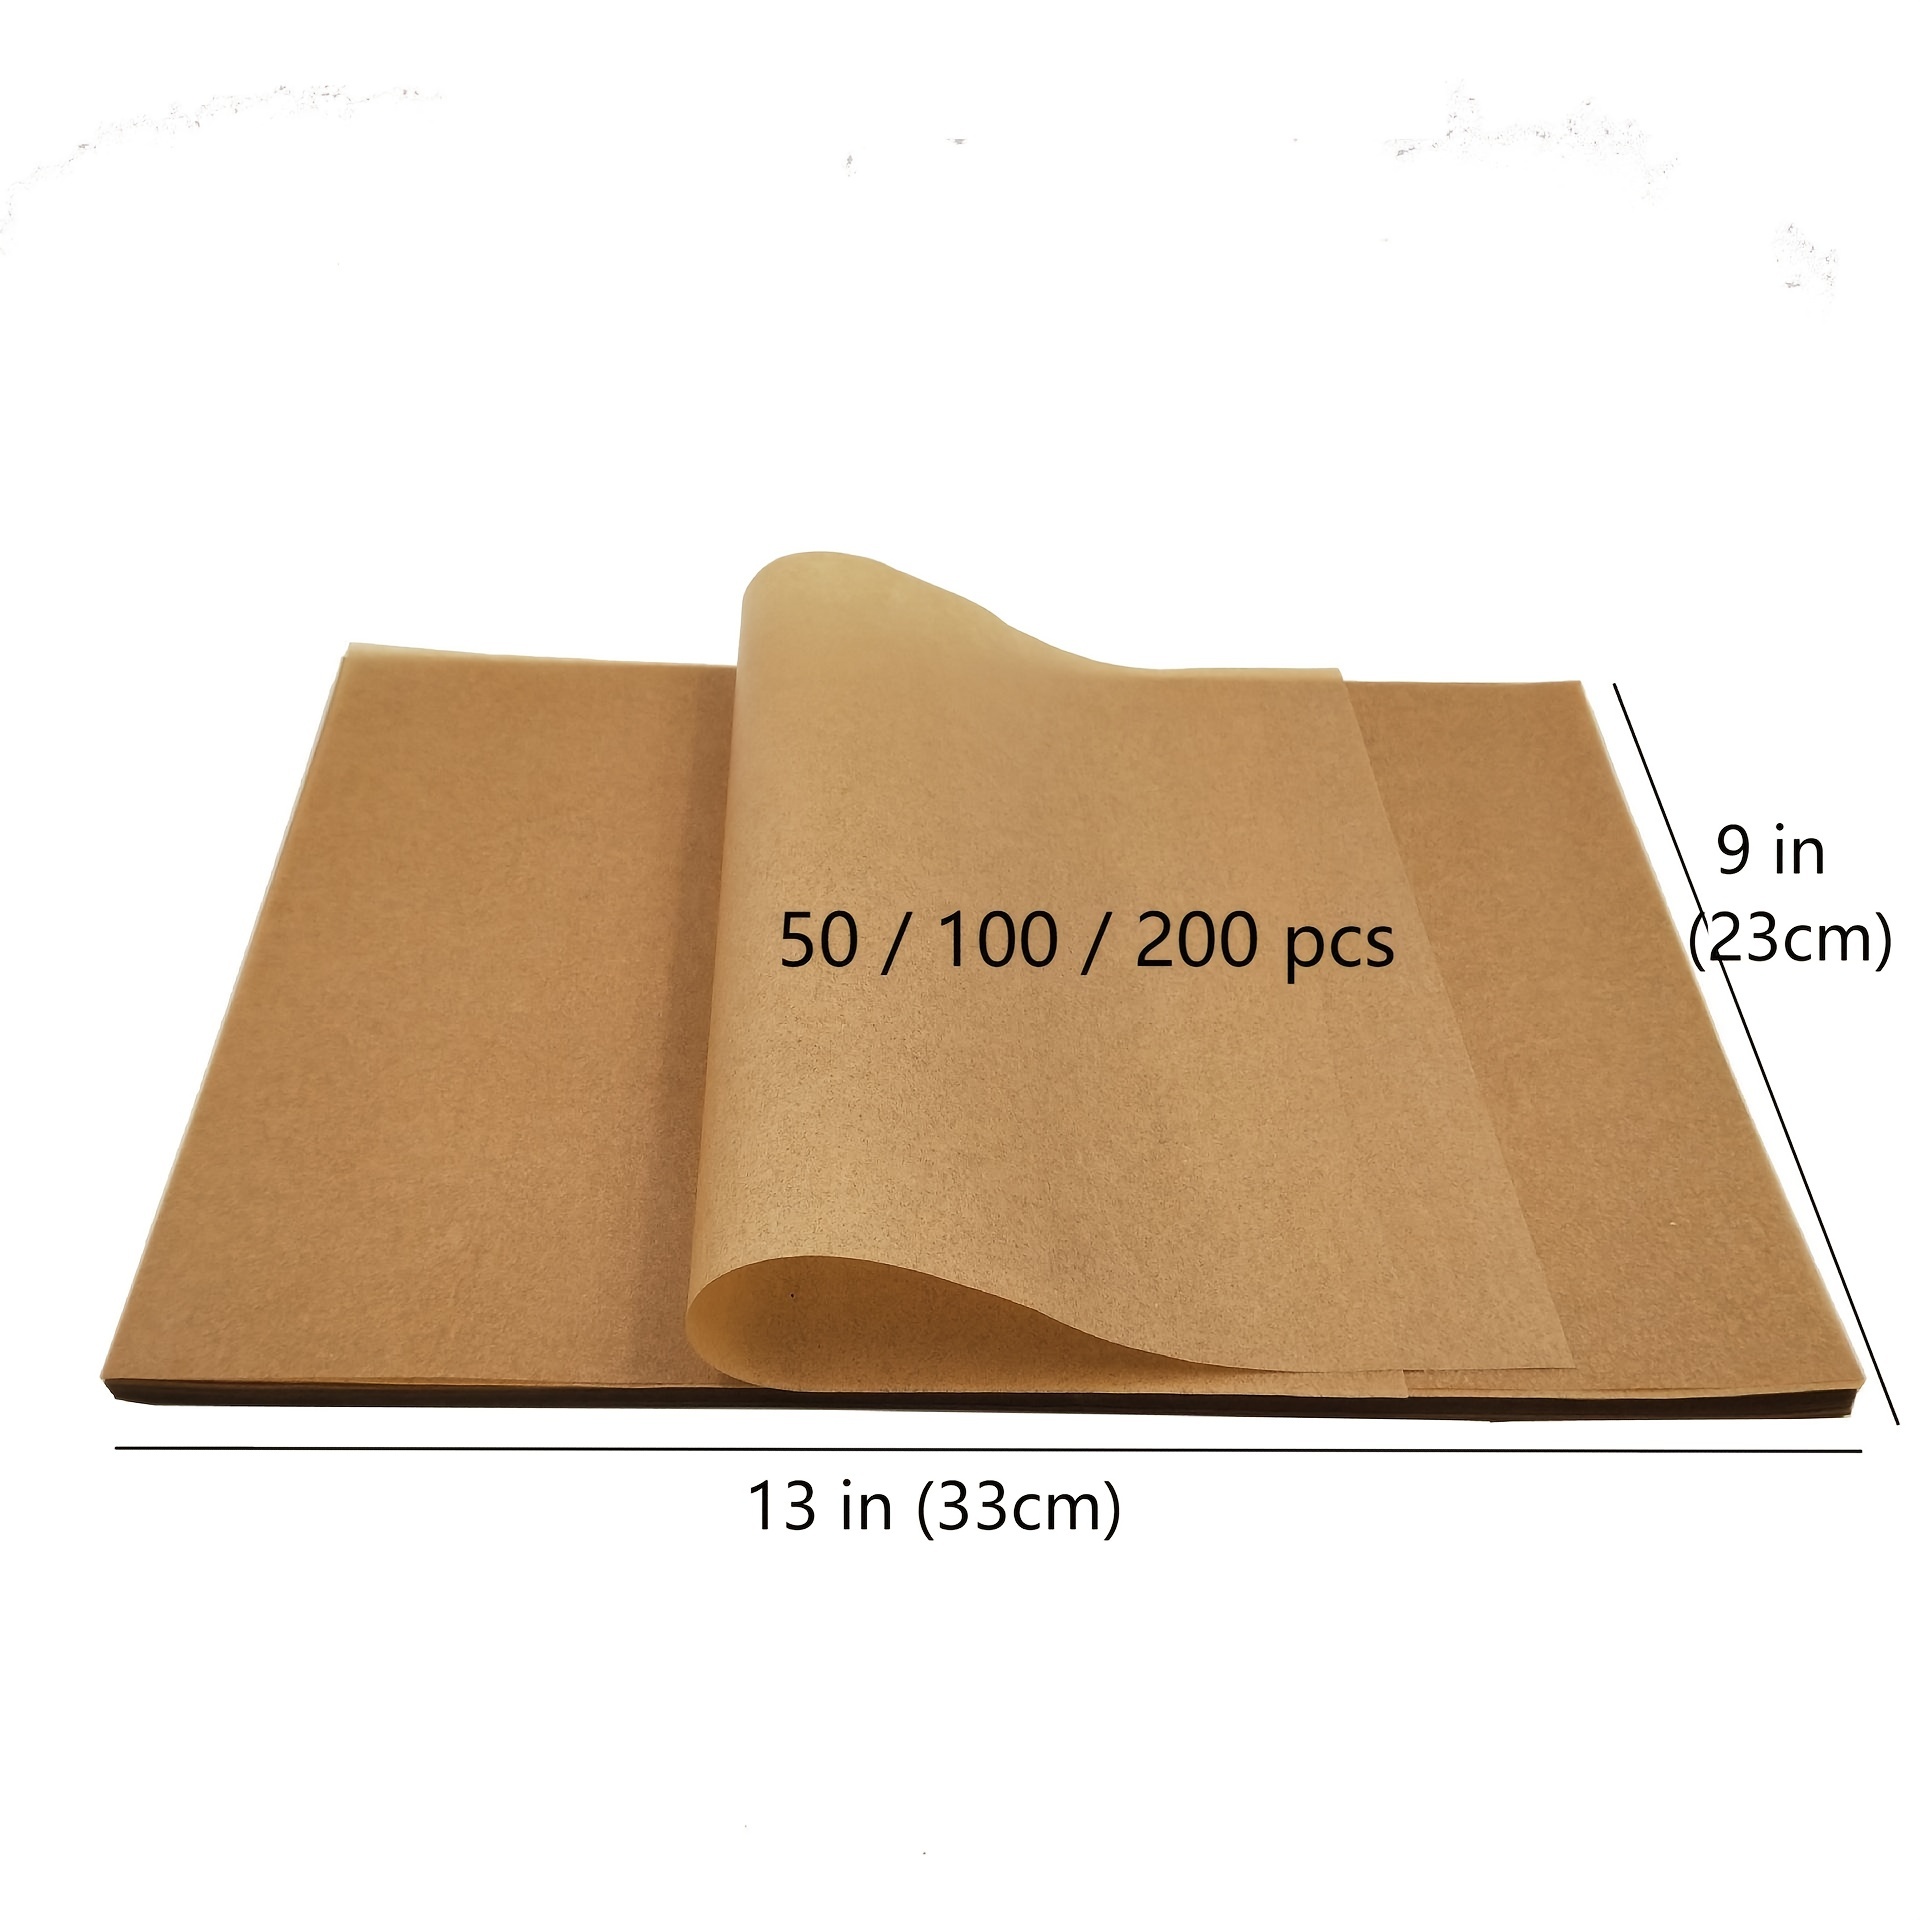 Parchment Paper Sheets for Baking, 12 X 16 Inch, Fit for Half Sheet